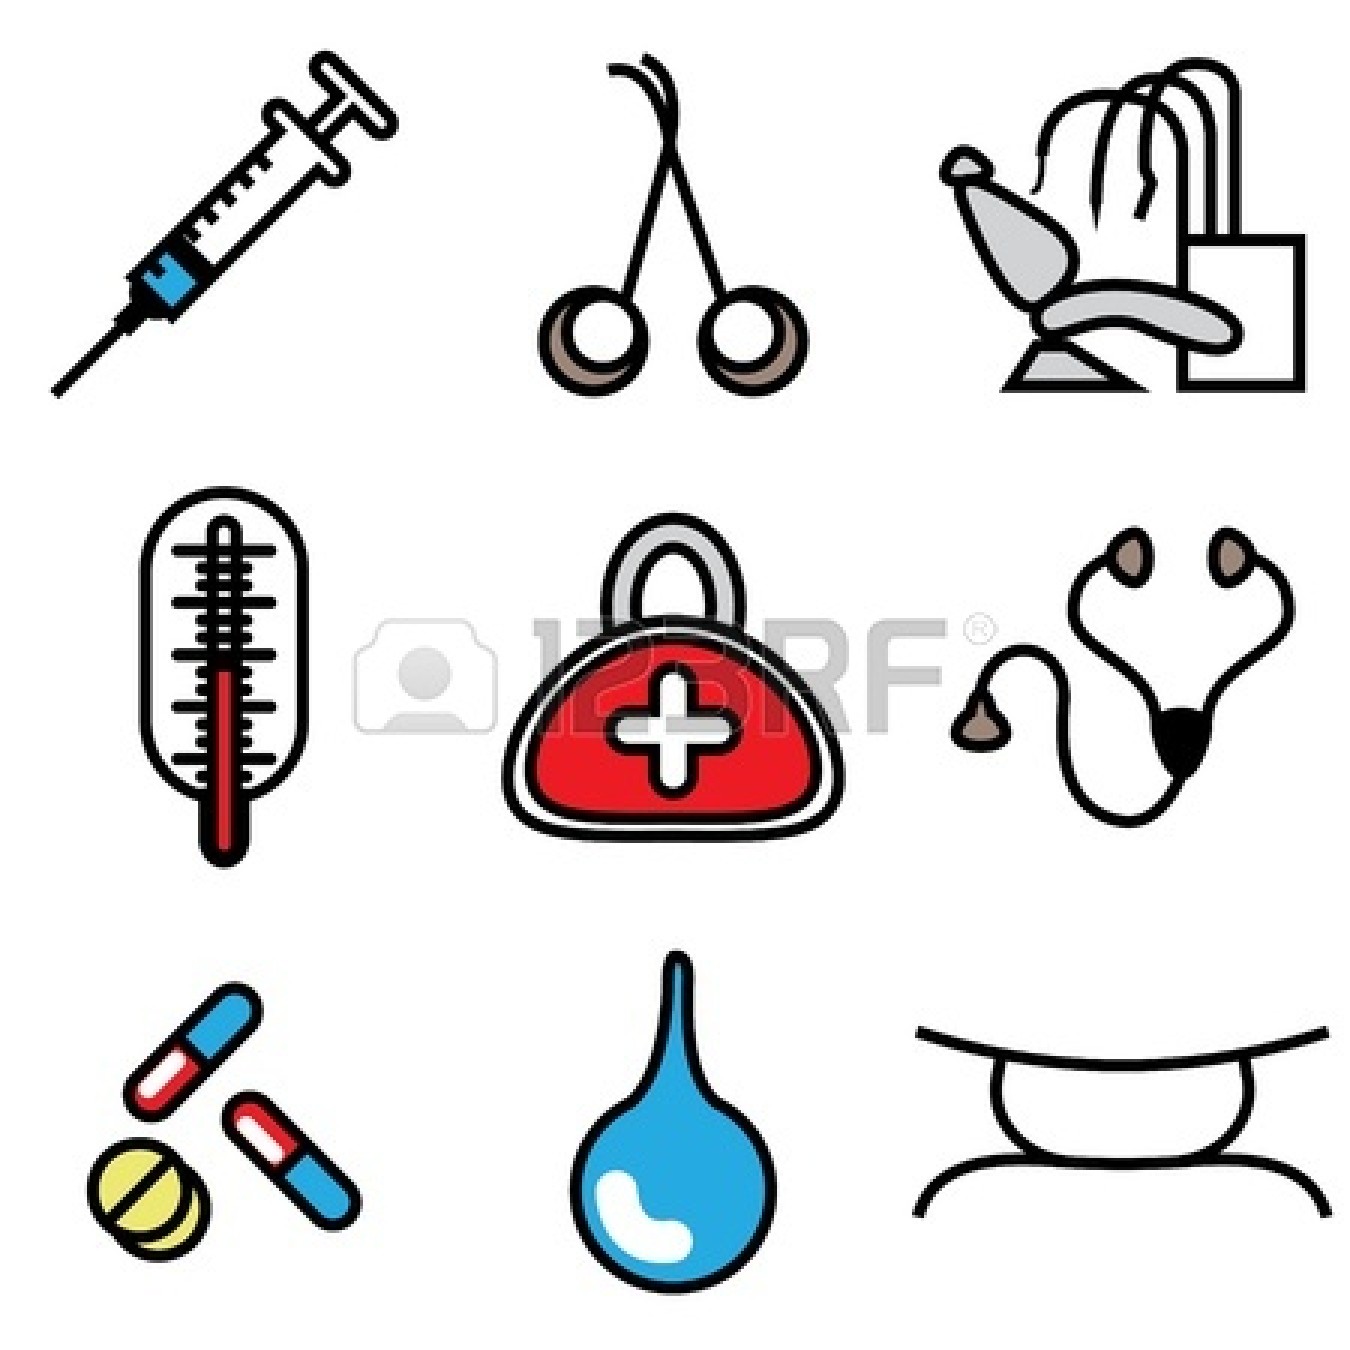 Doctor tools clipart.